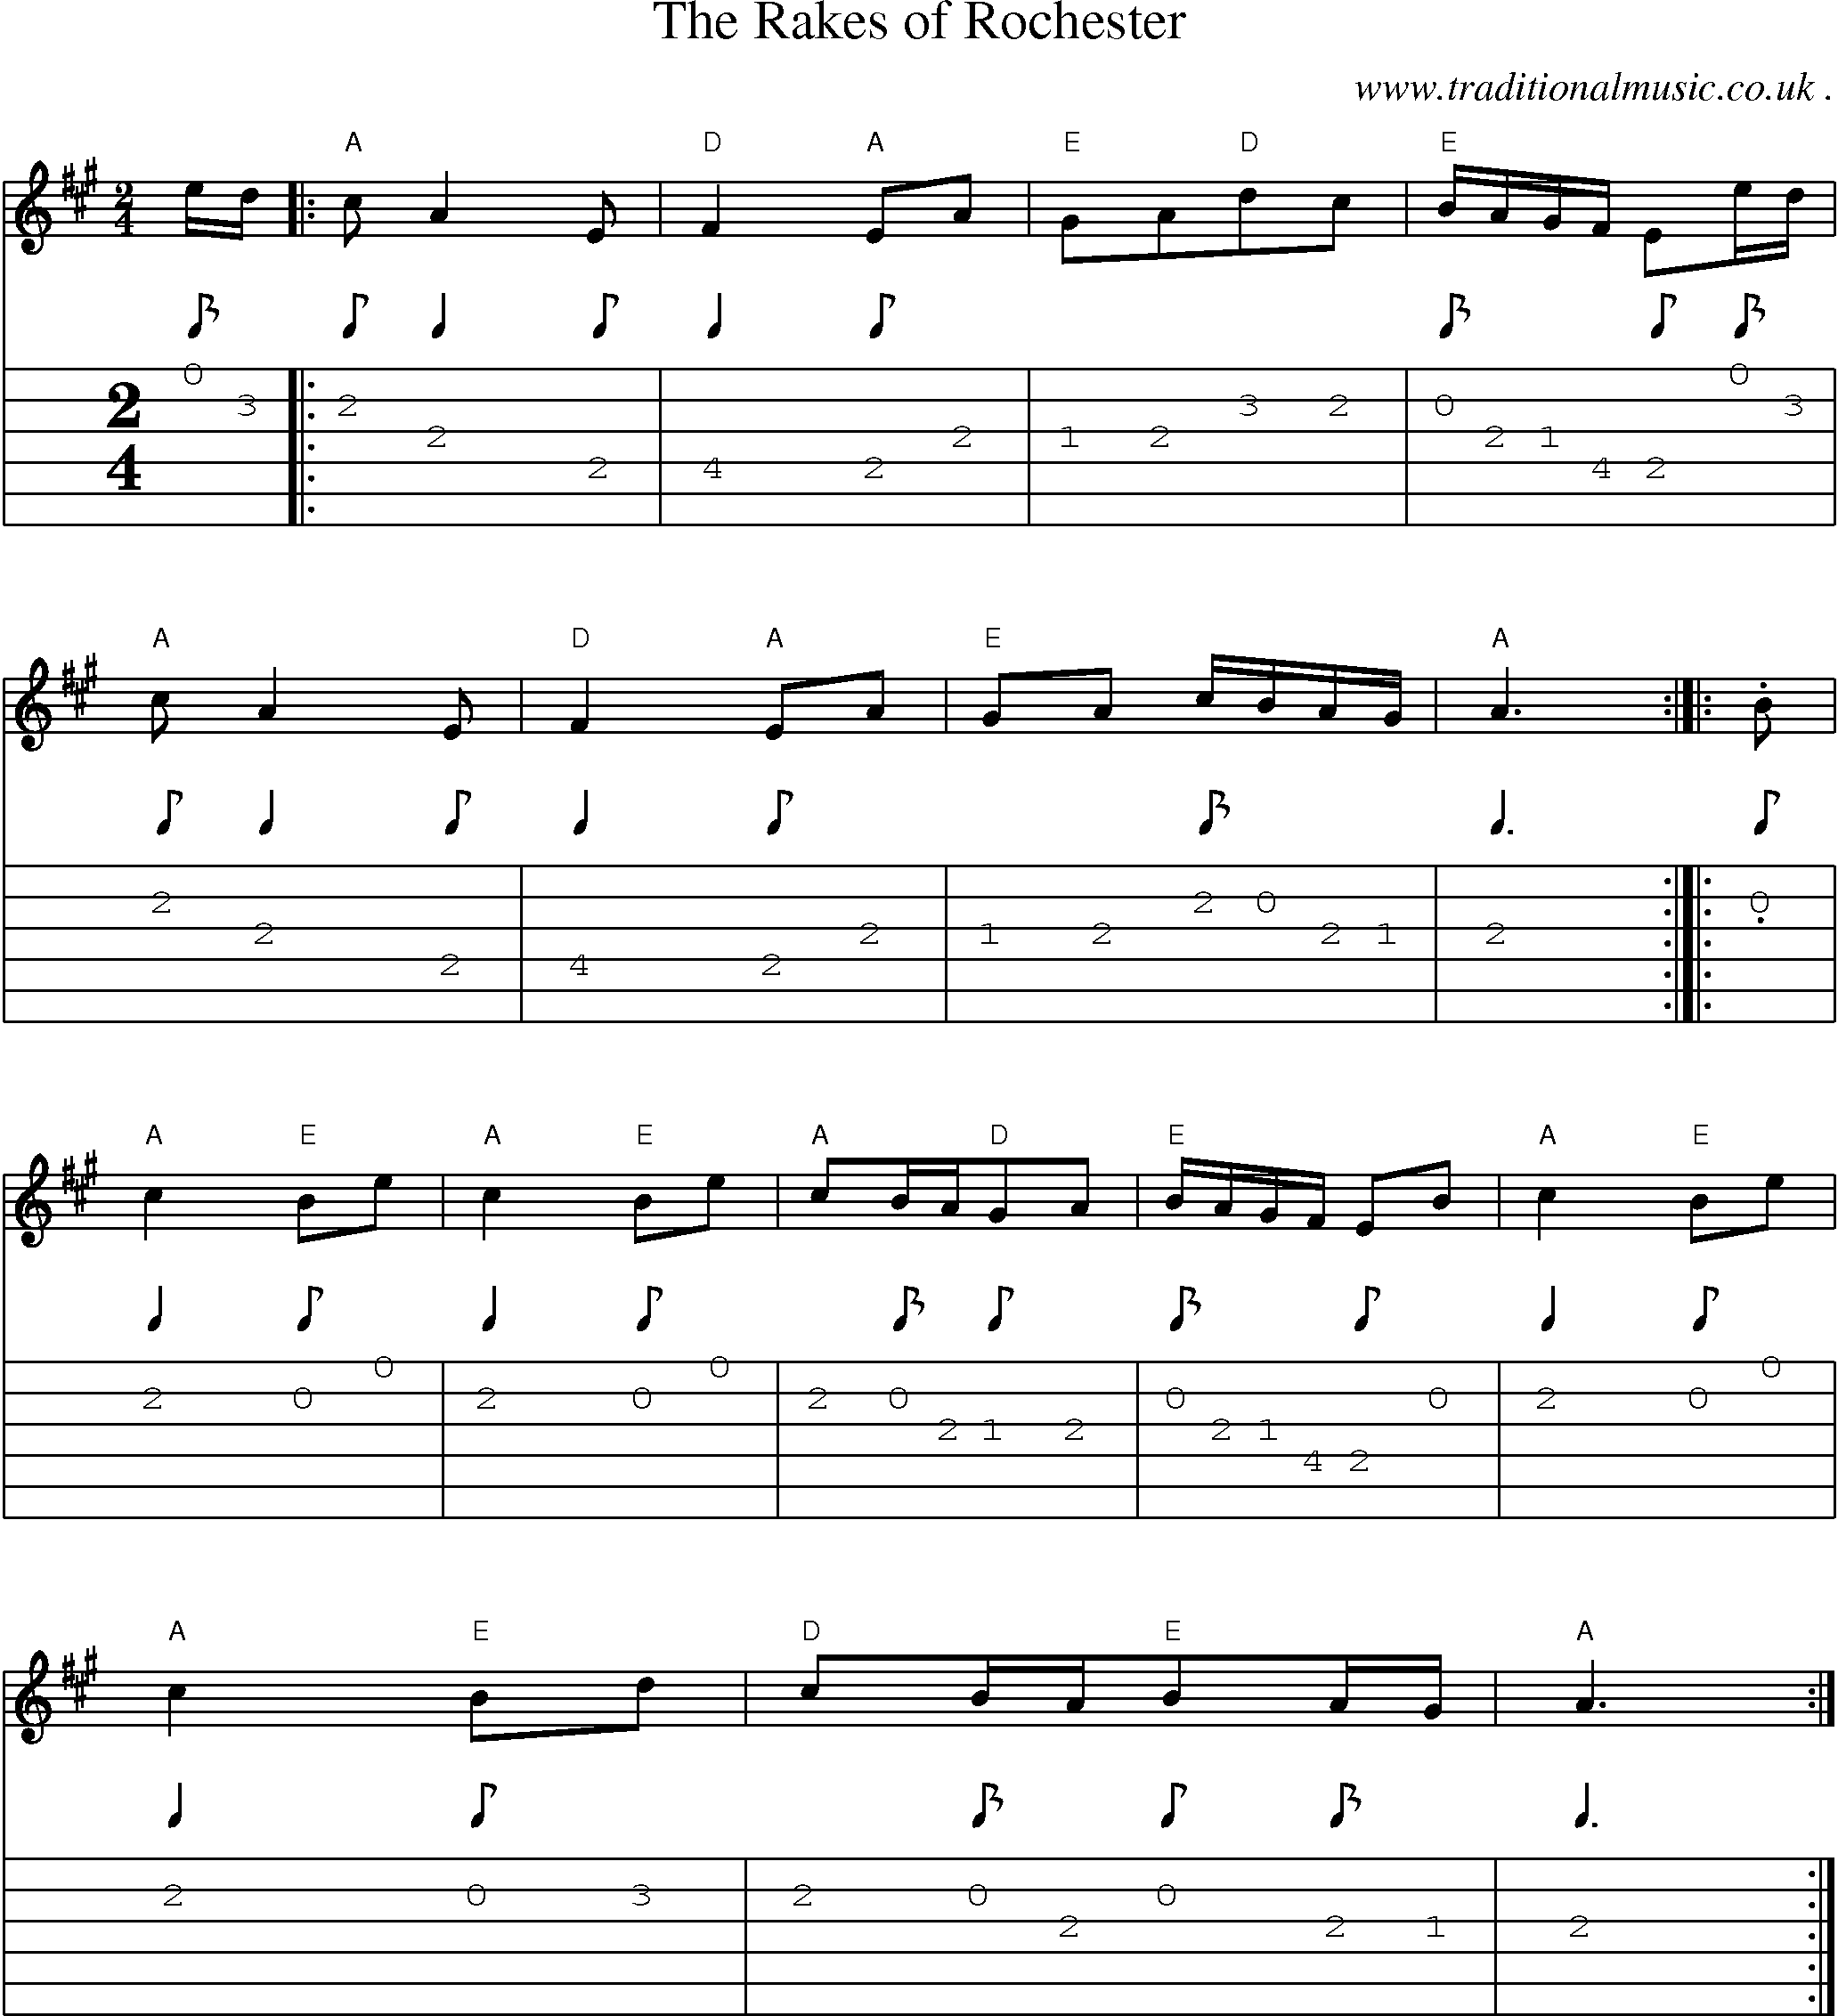 Sheet-Music and Guitar Tabs for The Rakes Of Rochester